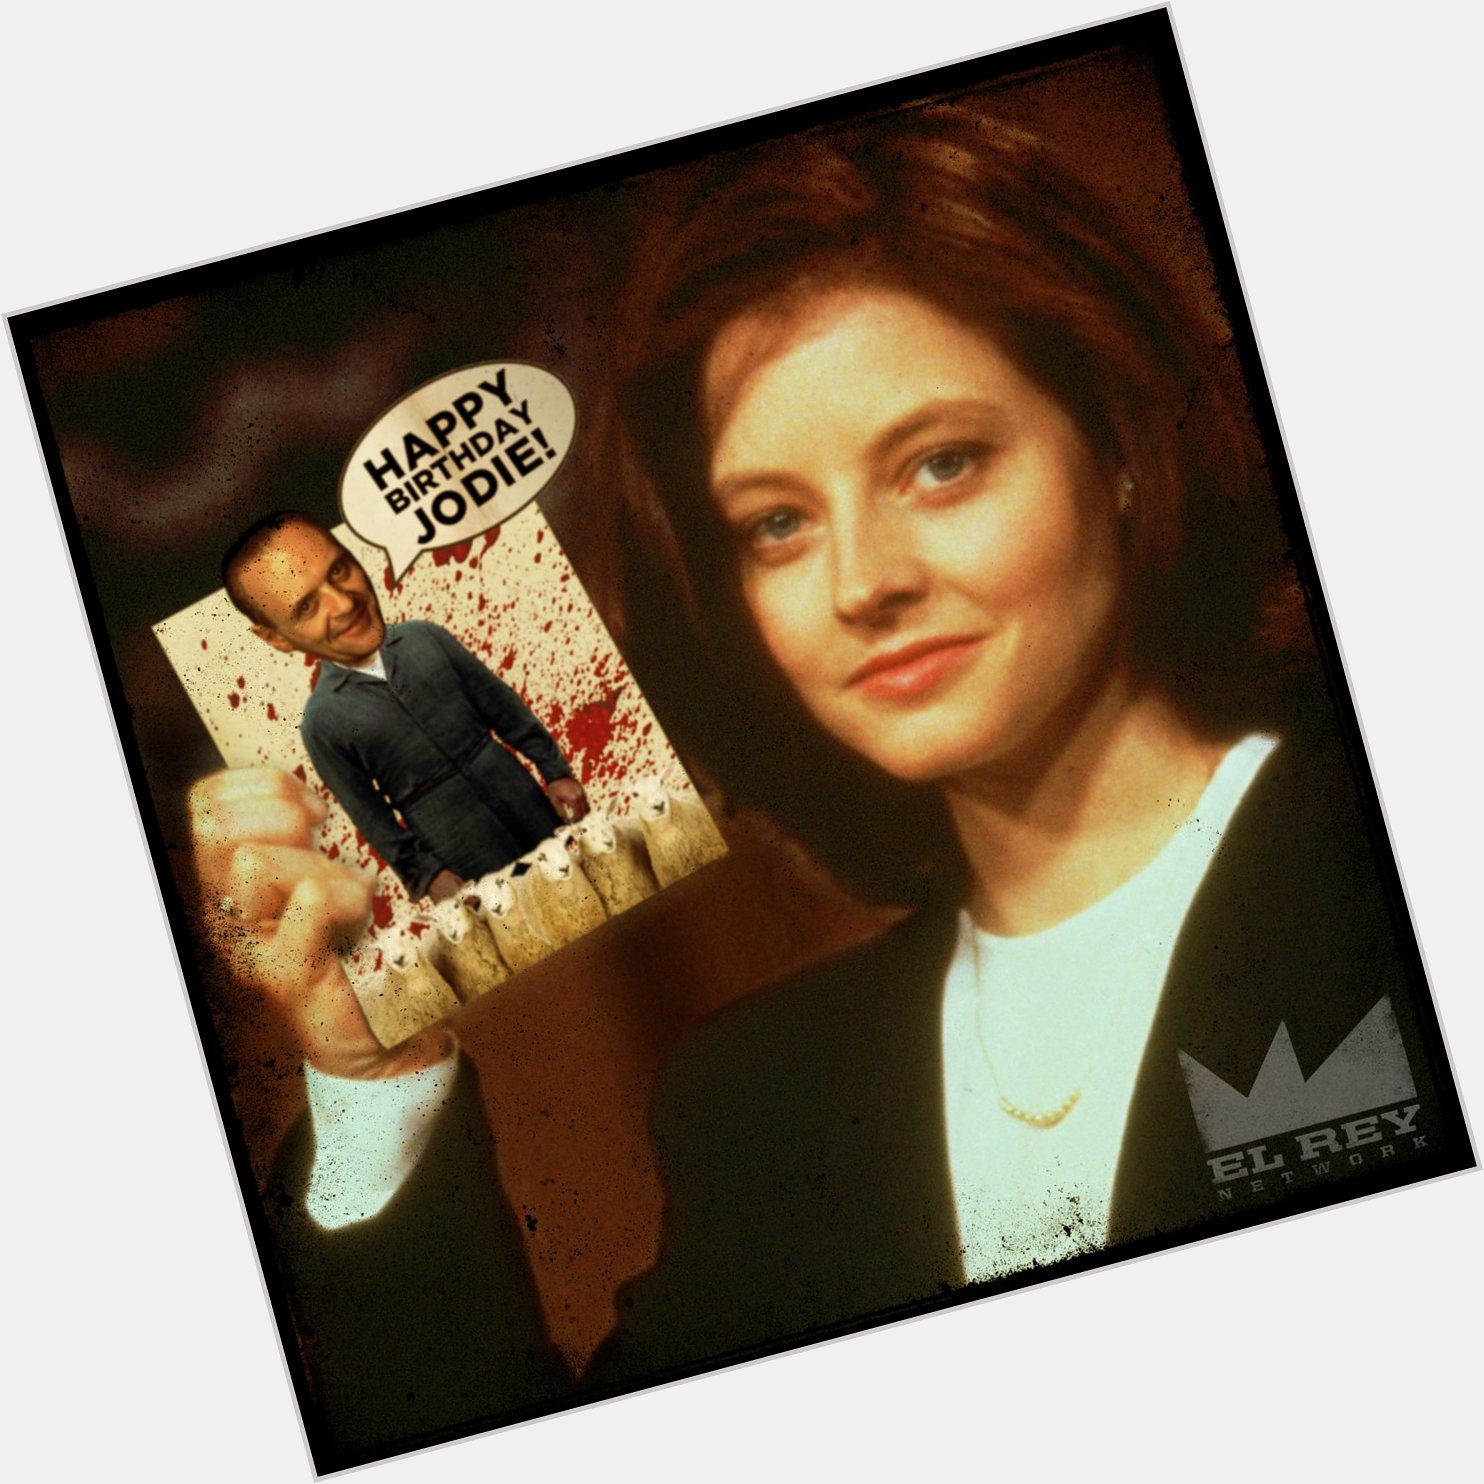 Happy birthday to Jodie Foster! We hope you enjoy your cake with a nice Chianti! 